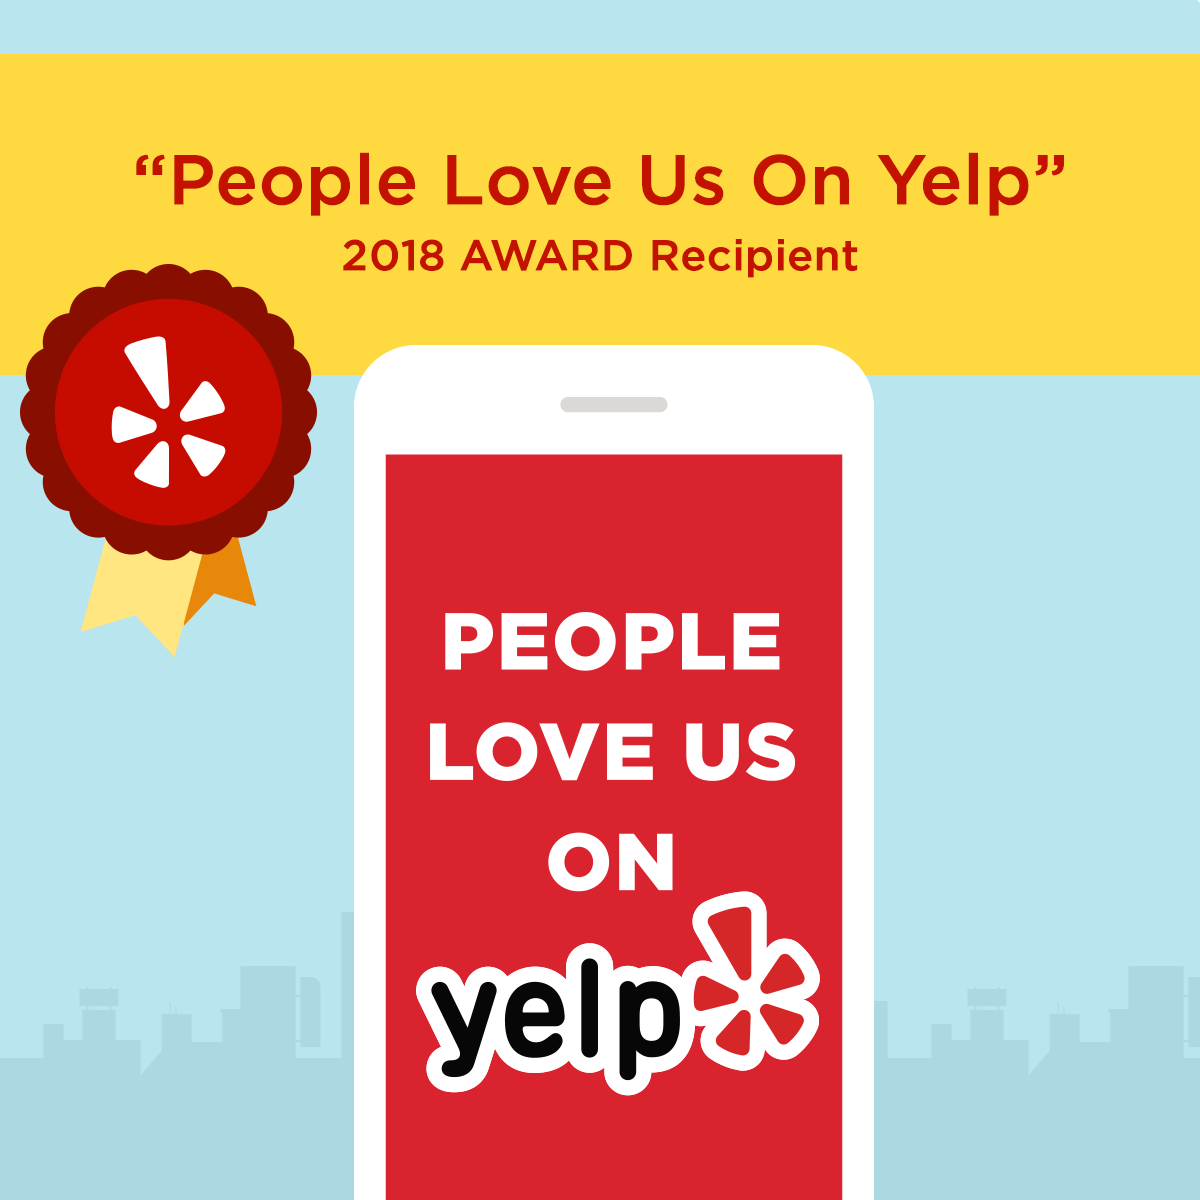 IT’S OFFICIAL- people love us on Yelp!